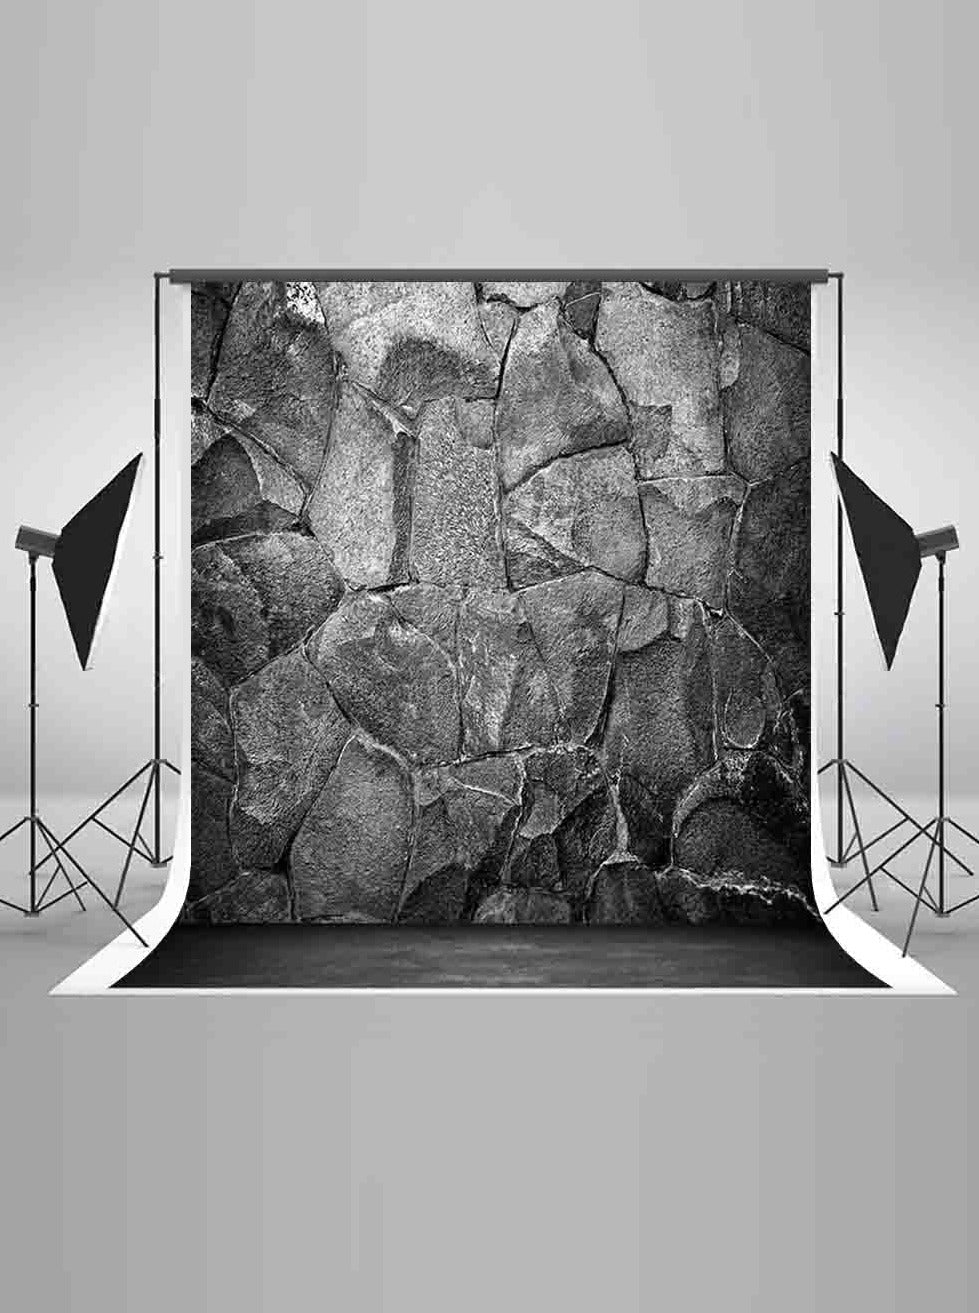 Vintage Gray Stone Wall Backdrop GY-157